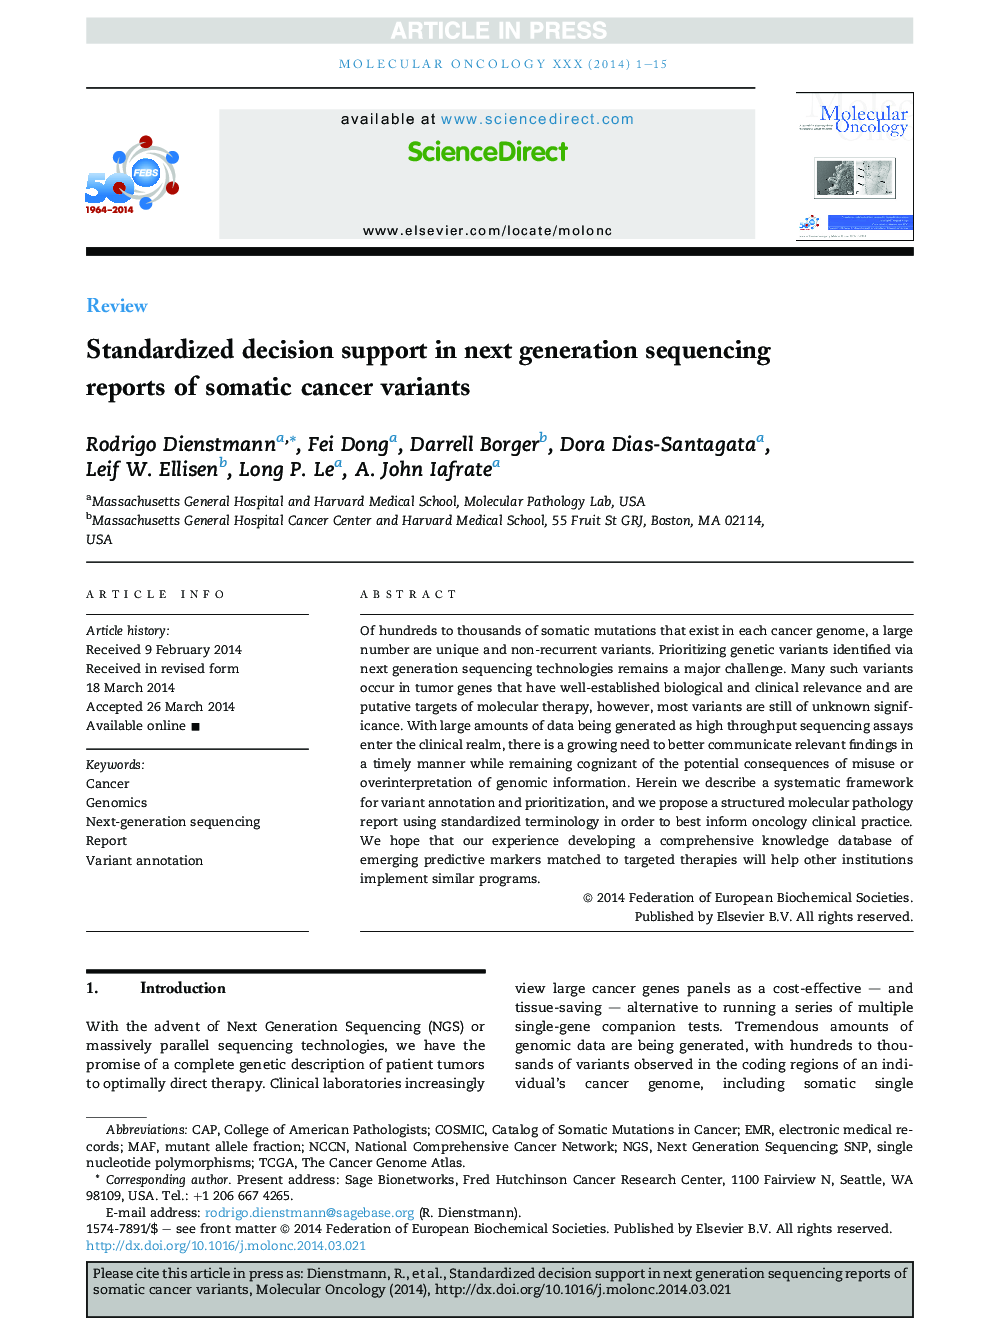 Standardized decision support in next generation sequencing reports of somatic cancer variants